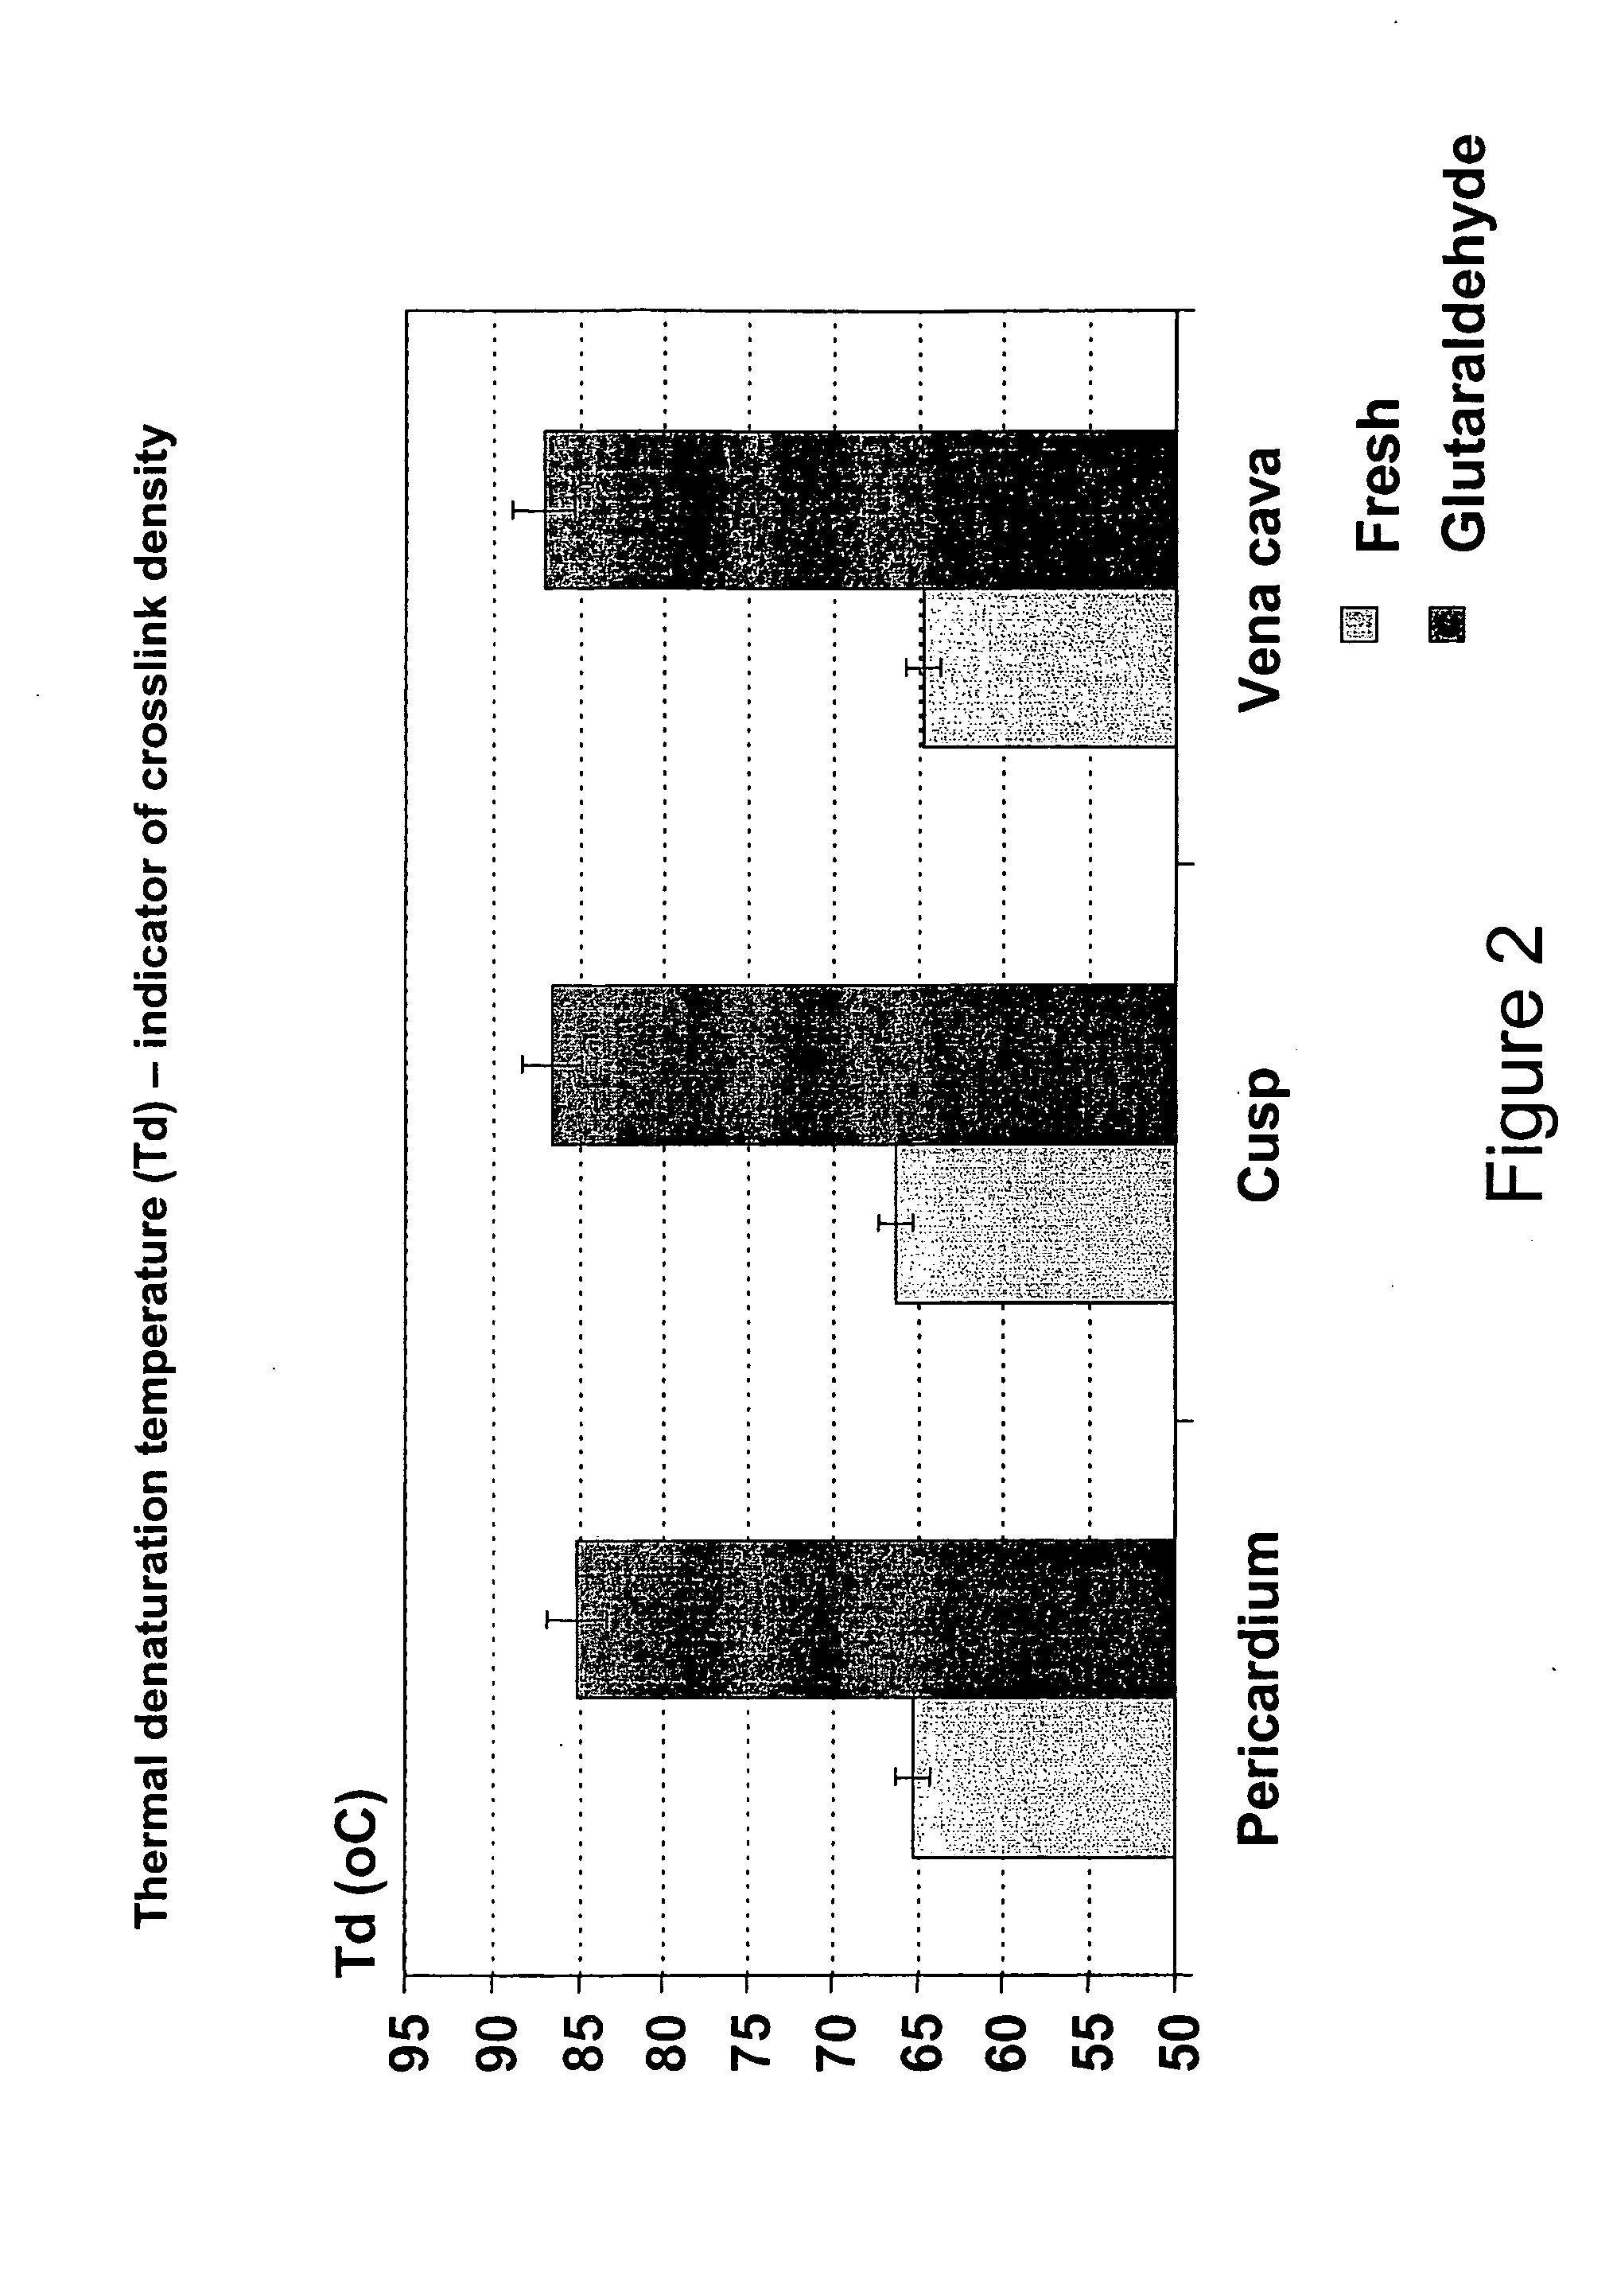 Tissue material and process for bioprosthesis